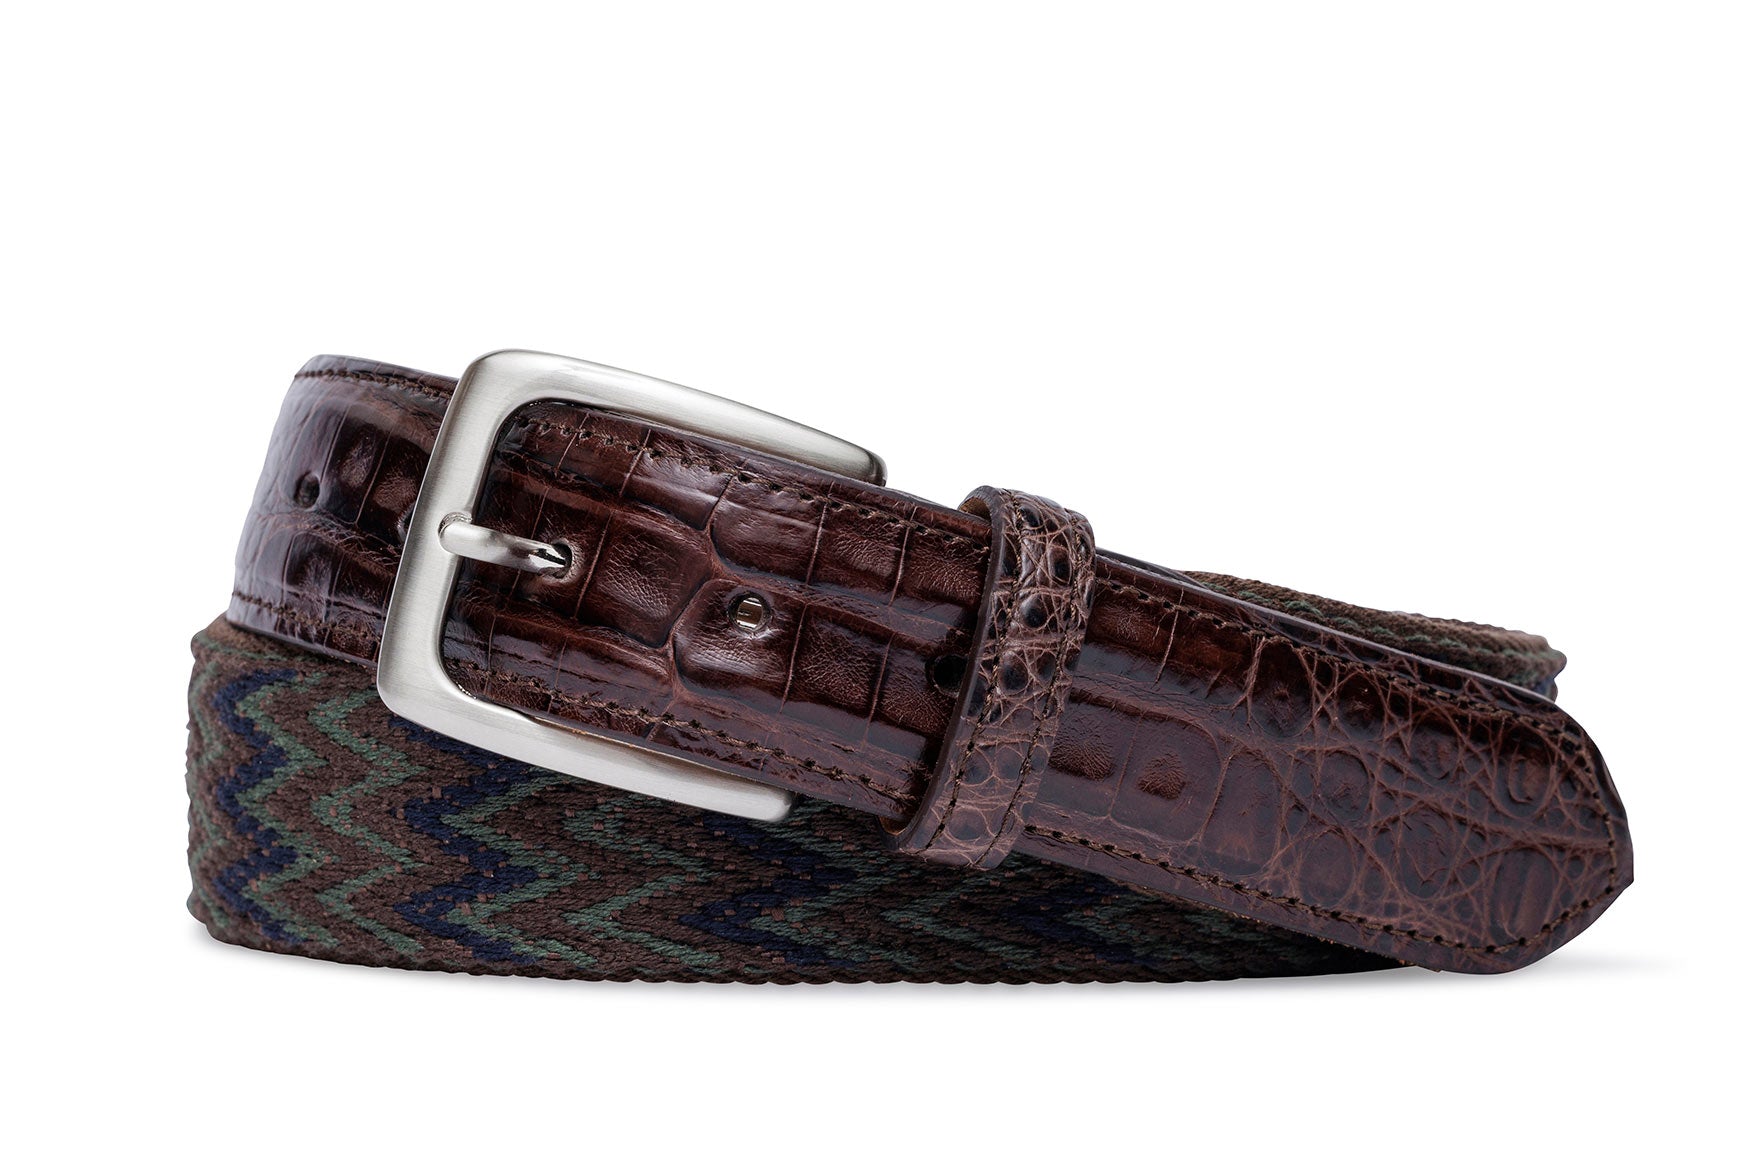 Ethnic Chevron Cotton Weave Belt with Crocodile Tabs and Brushed Nickel Buckle